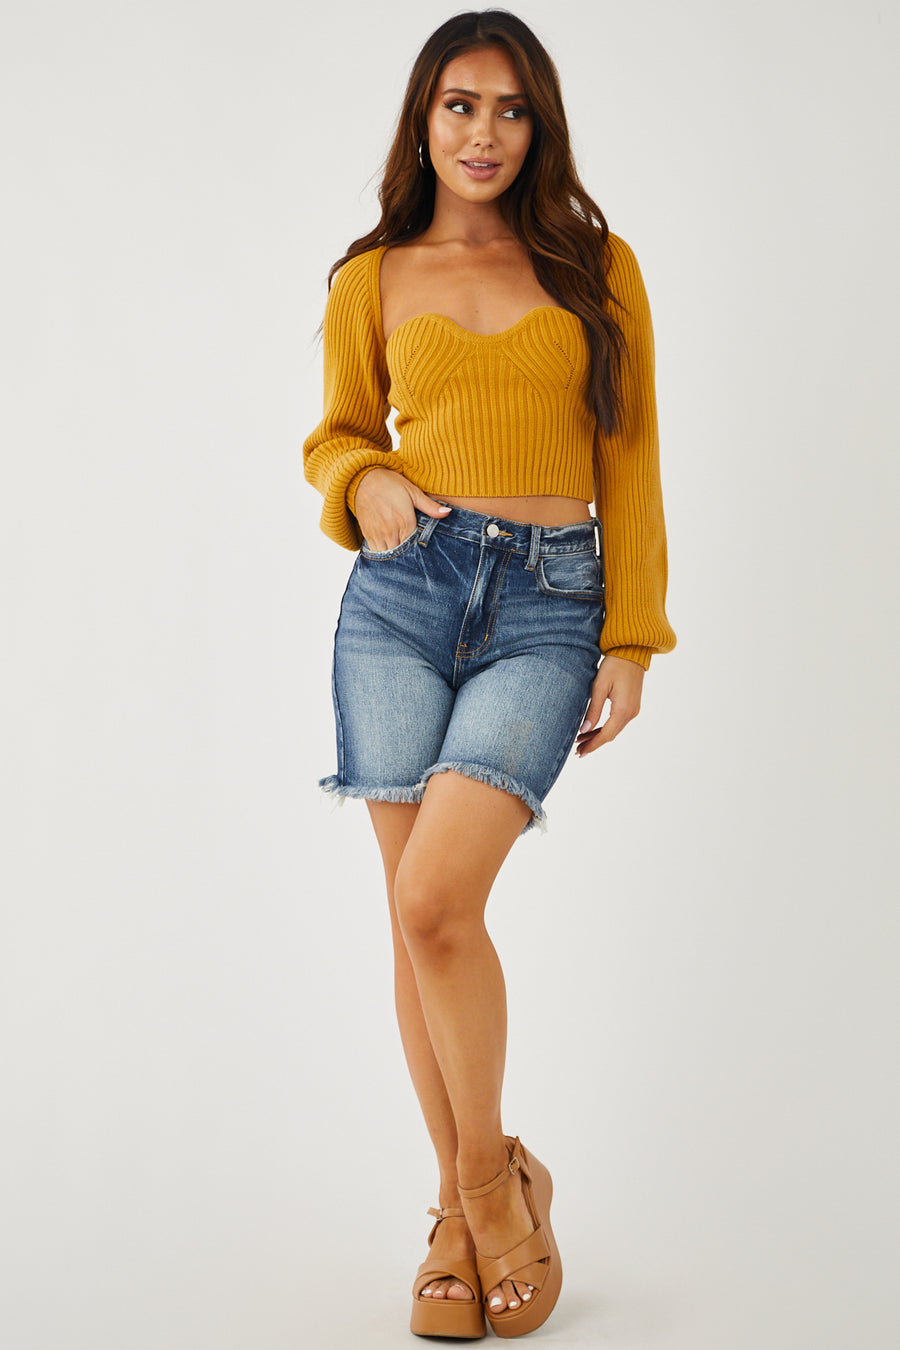 Marigold Strapless Crop Top and Bolero Two Piece Set